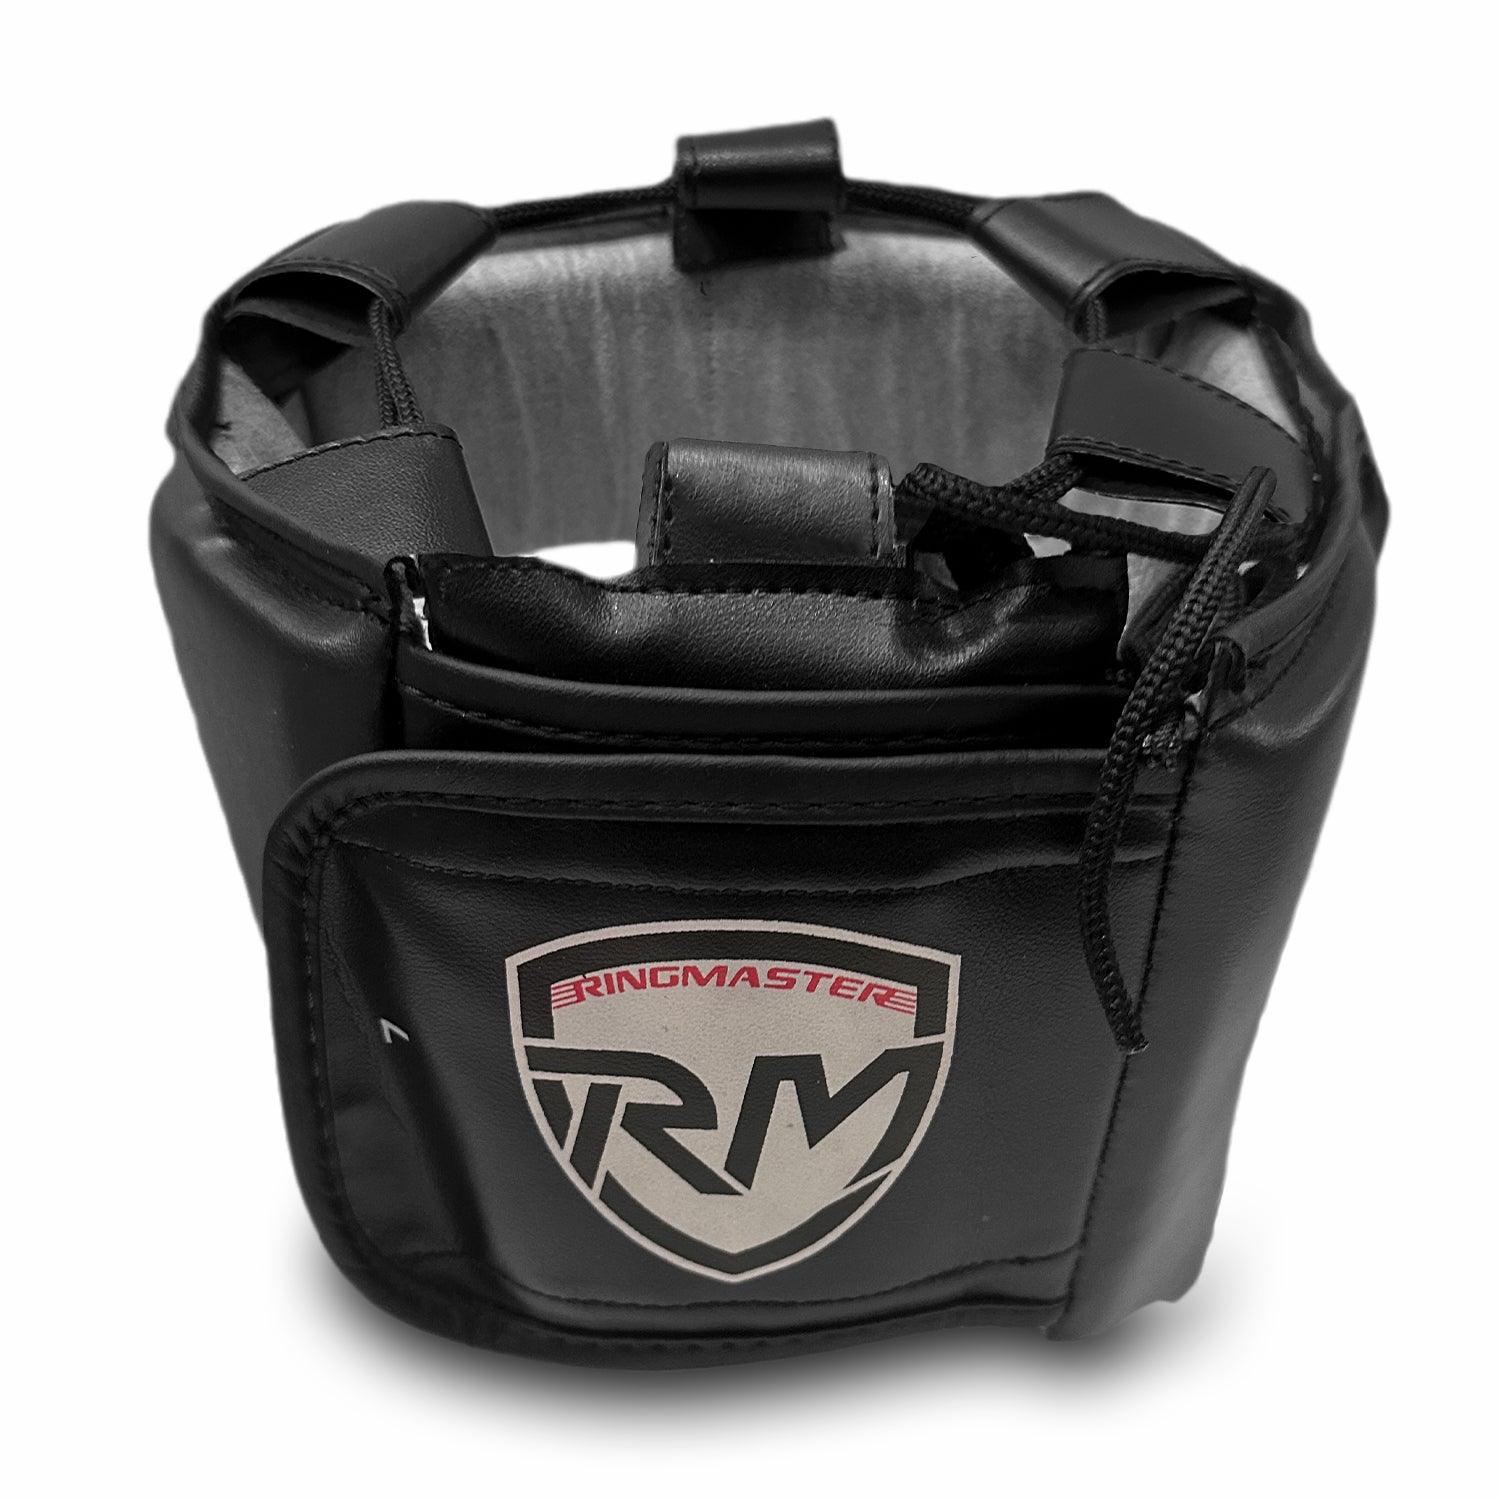 RingMaster Sports Open Face Boxing HeadGuard Box-R Series Black - RINGMASTER SPORTS - Made For Champions